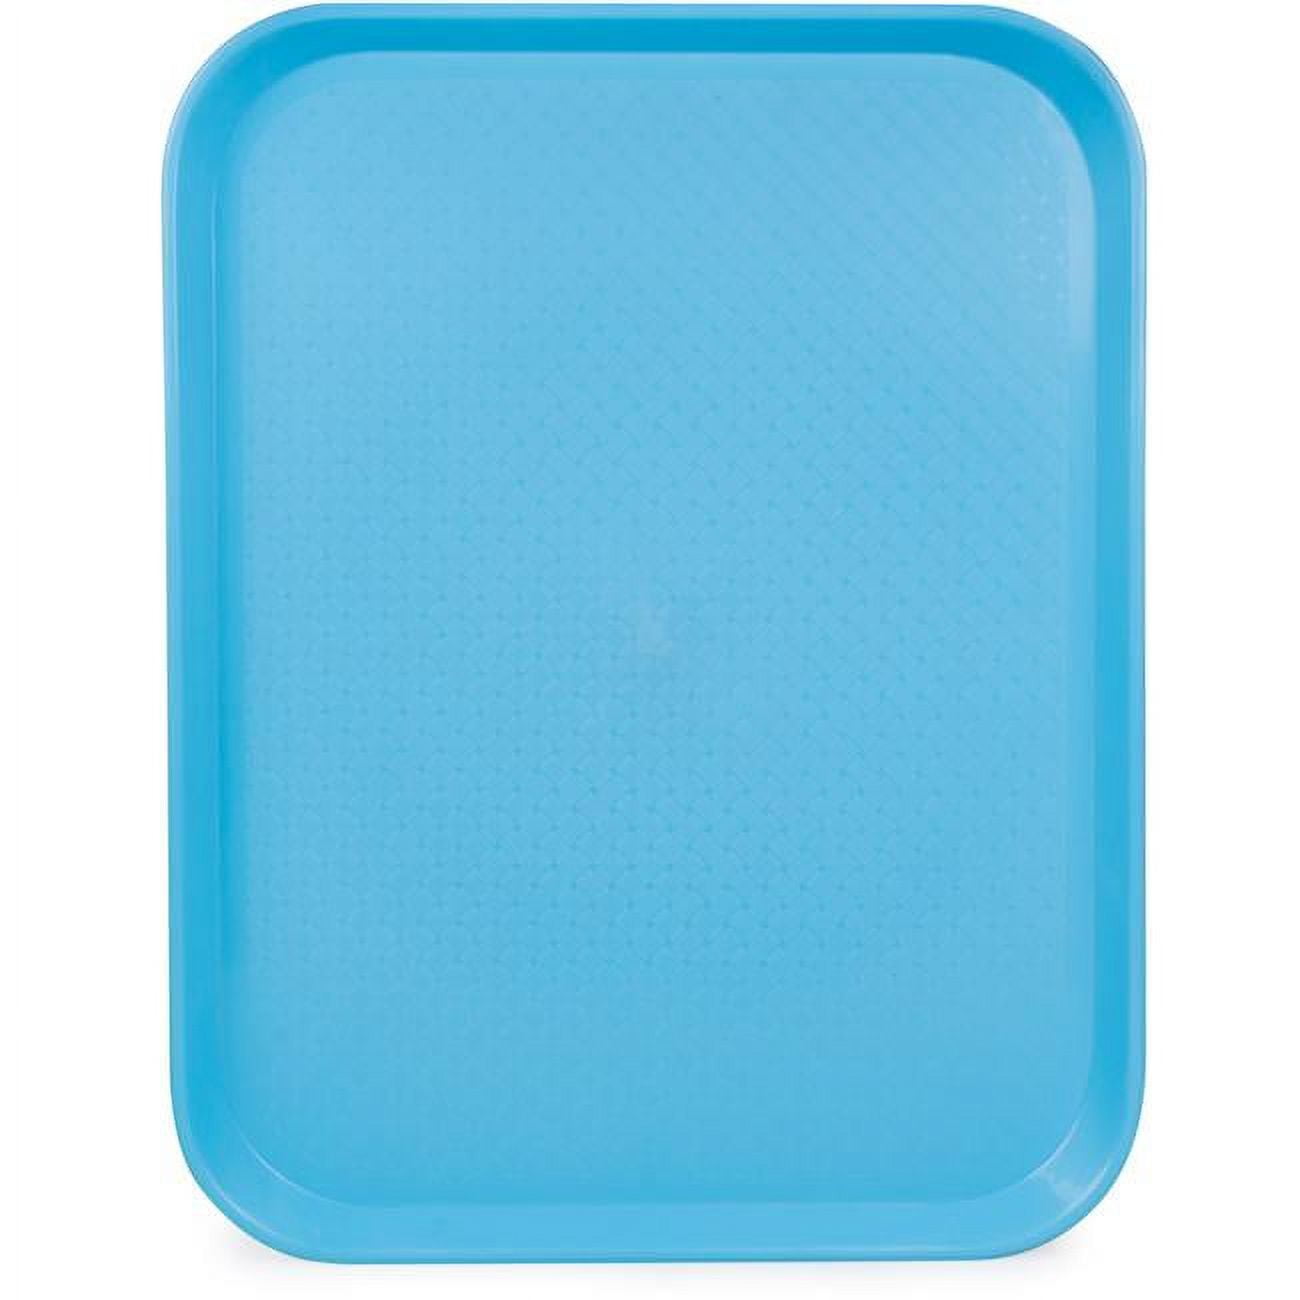 Kcaf-302 14 X 18 In. Cafeteria Tray, Blue